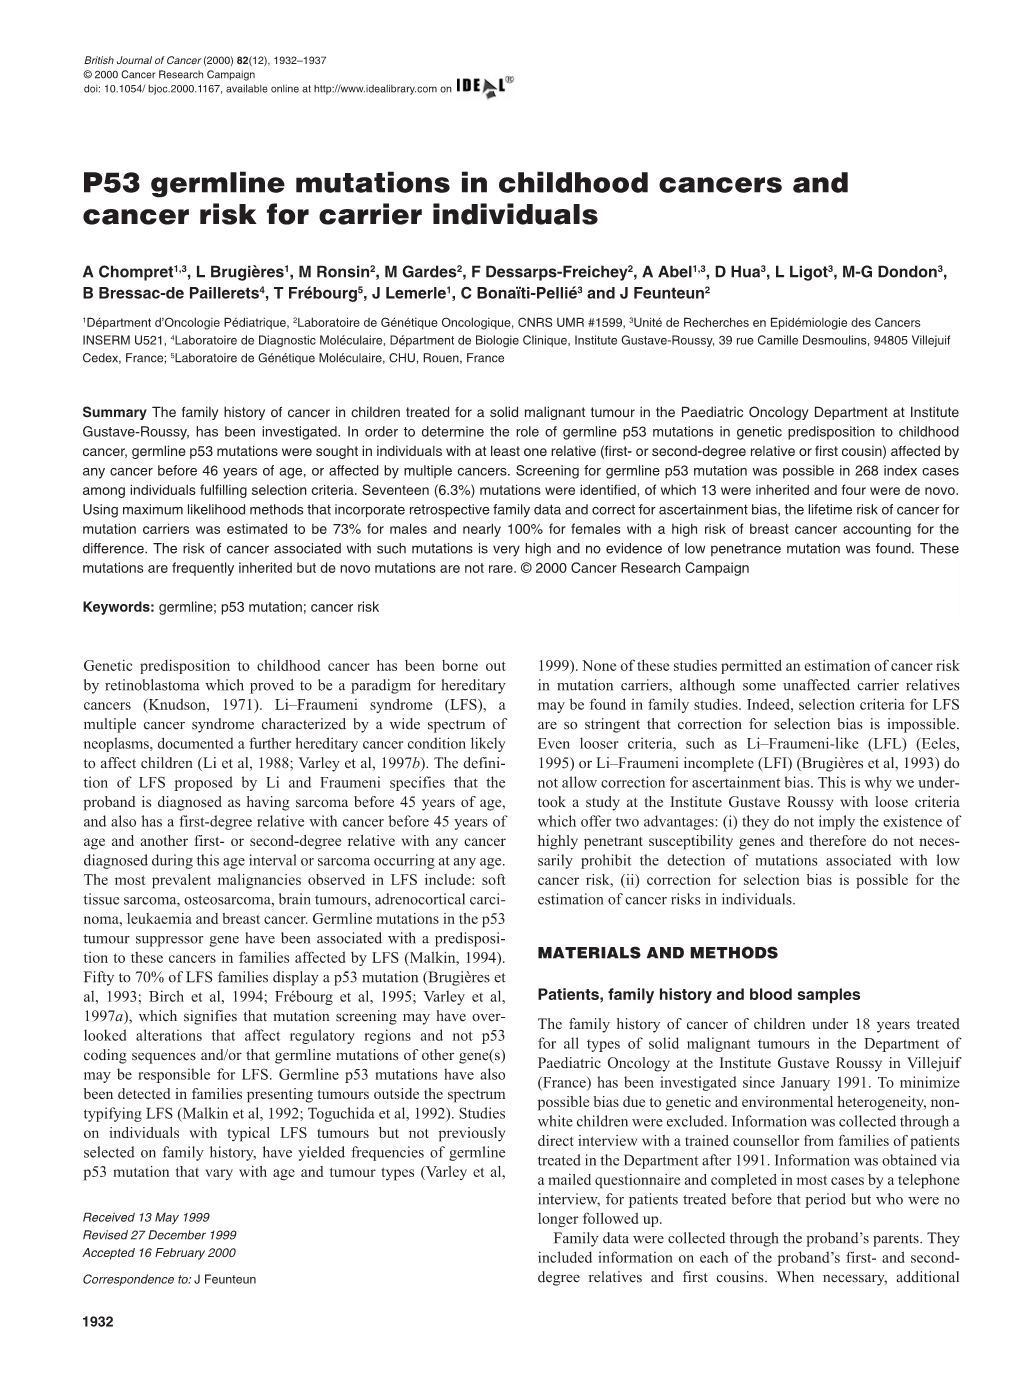 P53 Germline Mutations in Childhood Cancers and Cancer Risk for Carrier